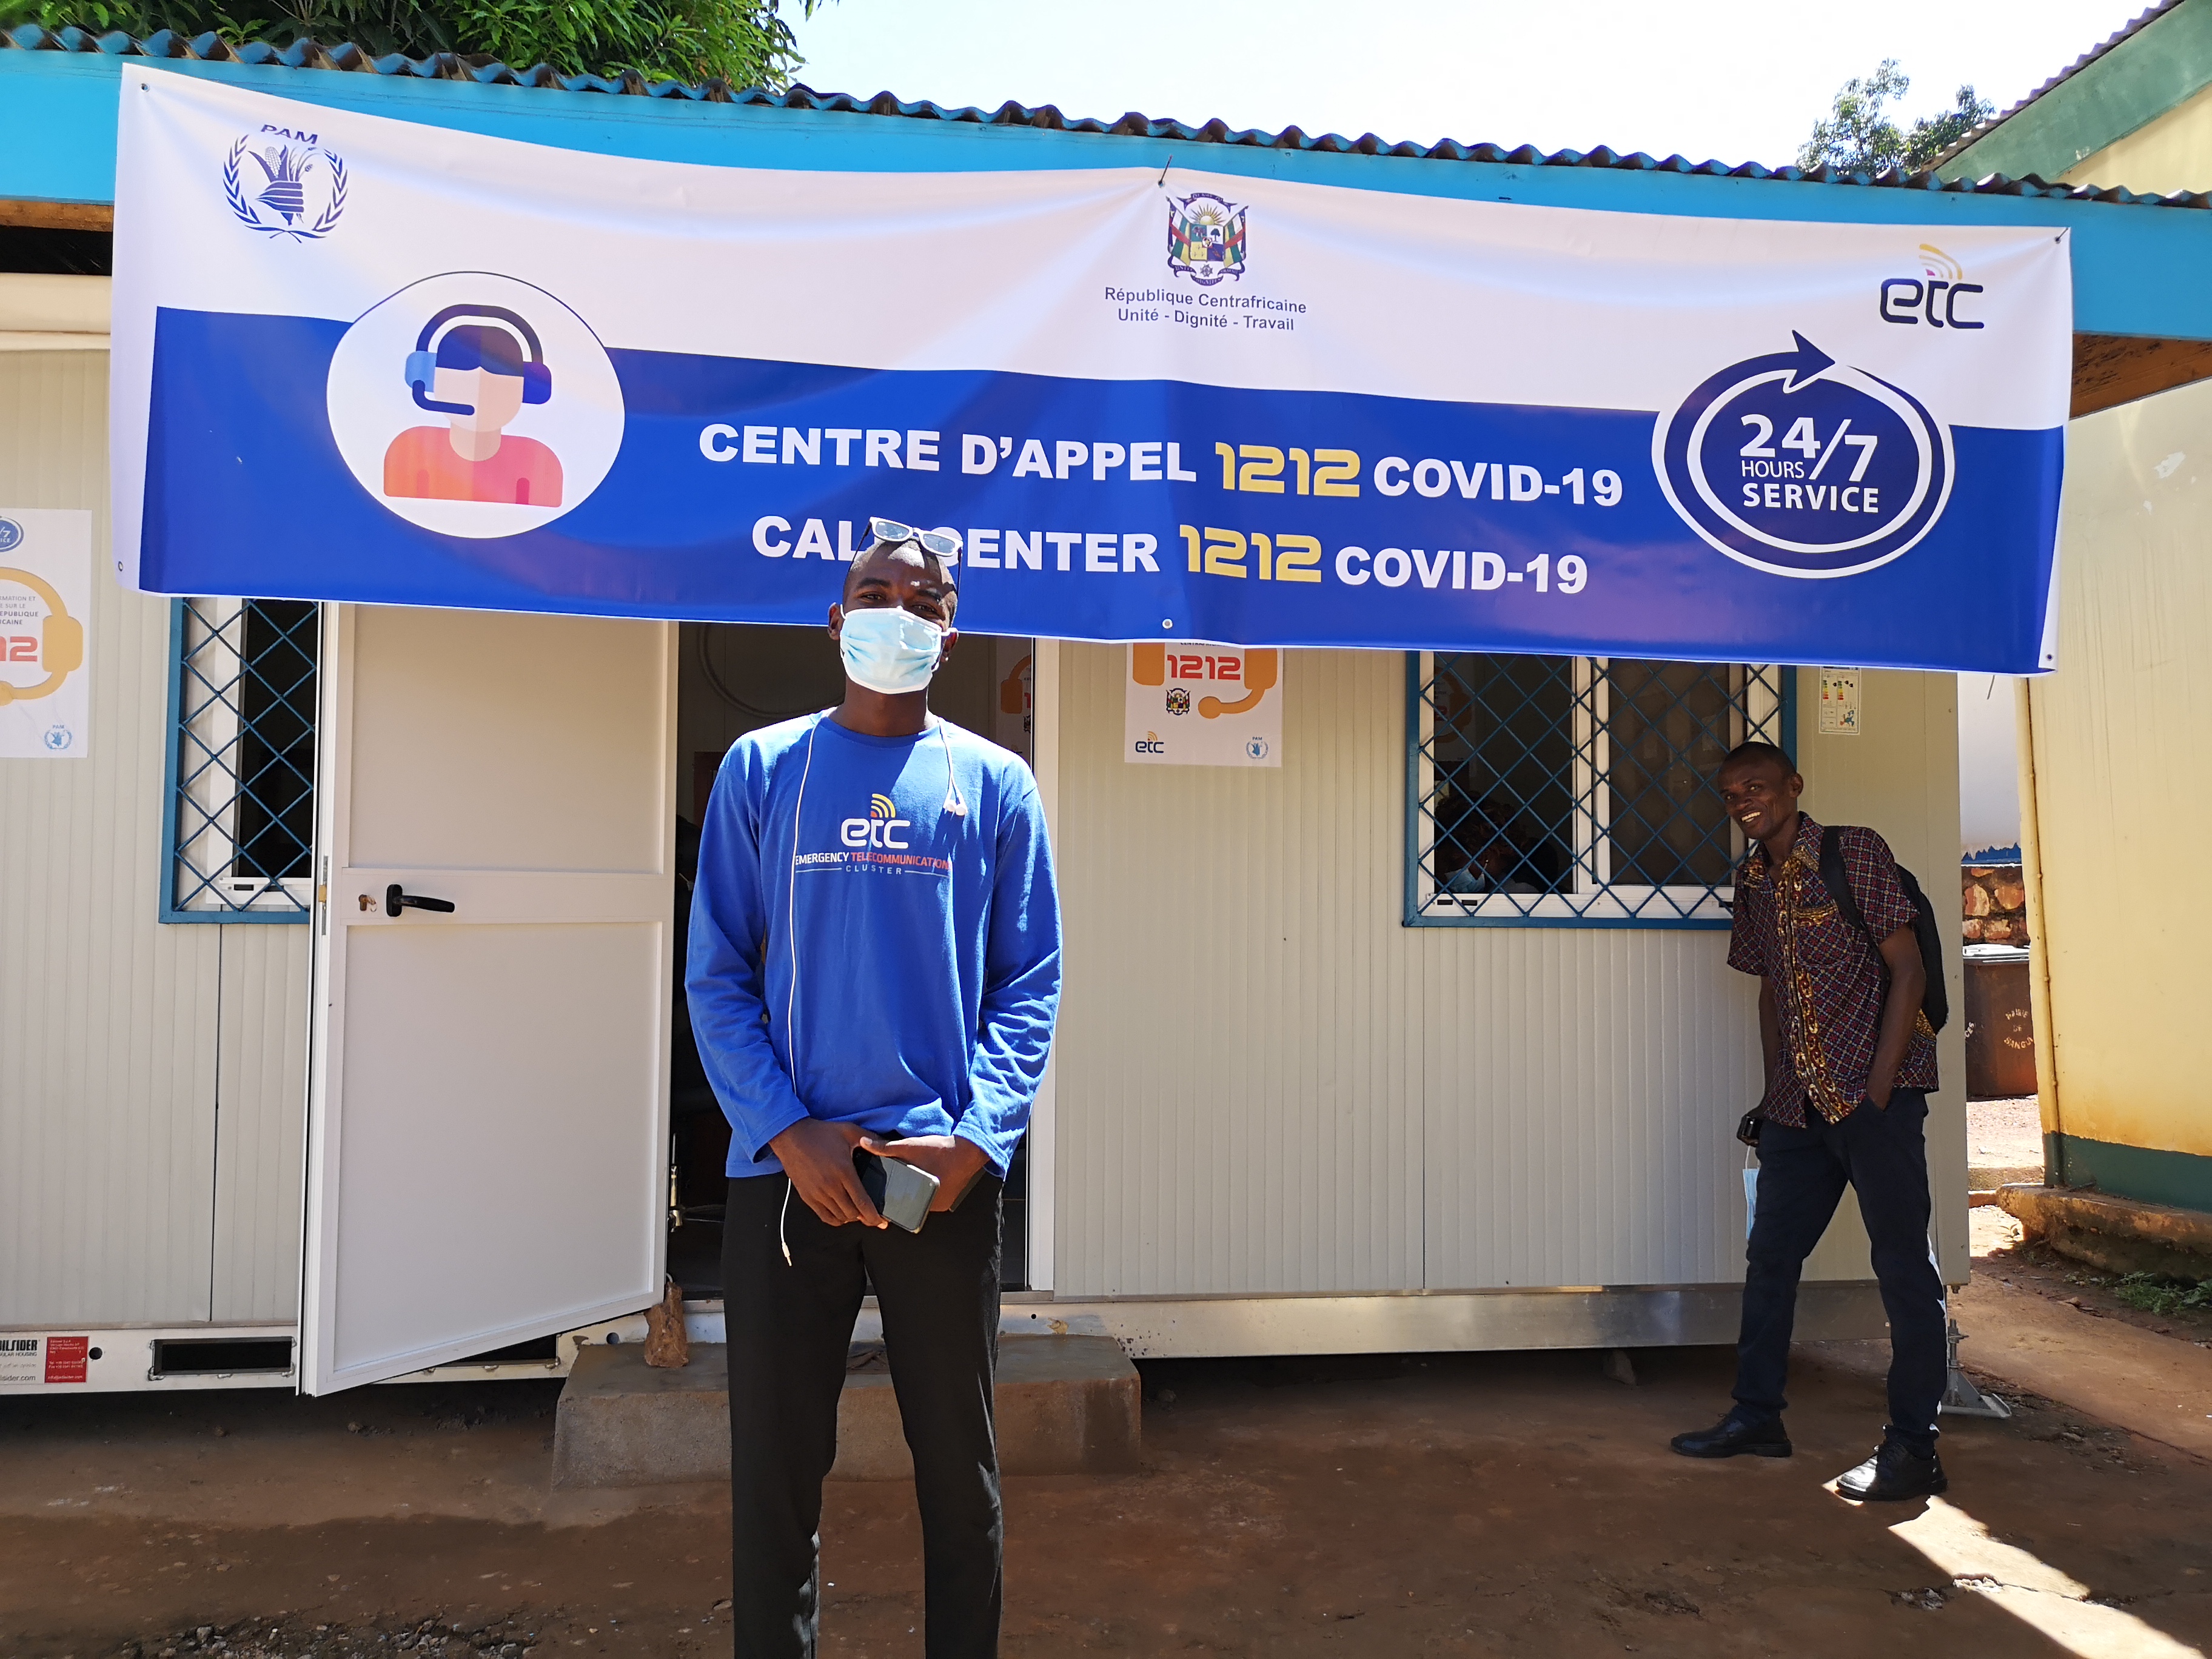 Technical support officer Labon outside the 24-hour call centre. Photo: WFP/Elizabeth Millership